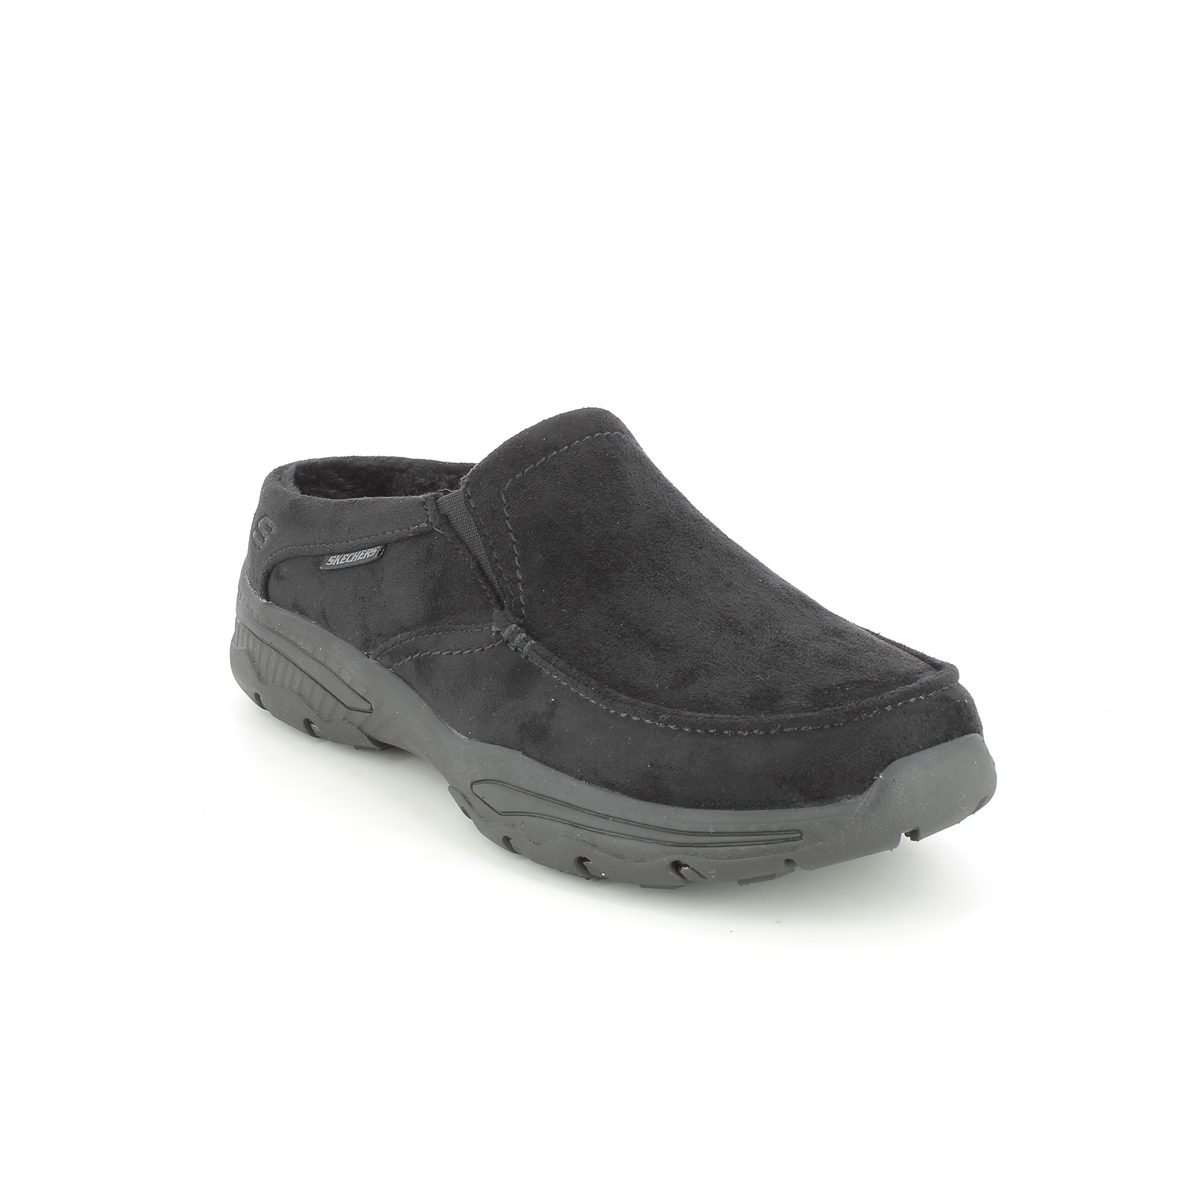 Skechers Creston Moc Relaxed BLK Black Mens mules 204402 in a Plain Textile in Size 8